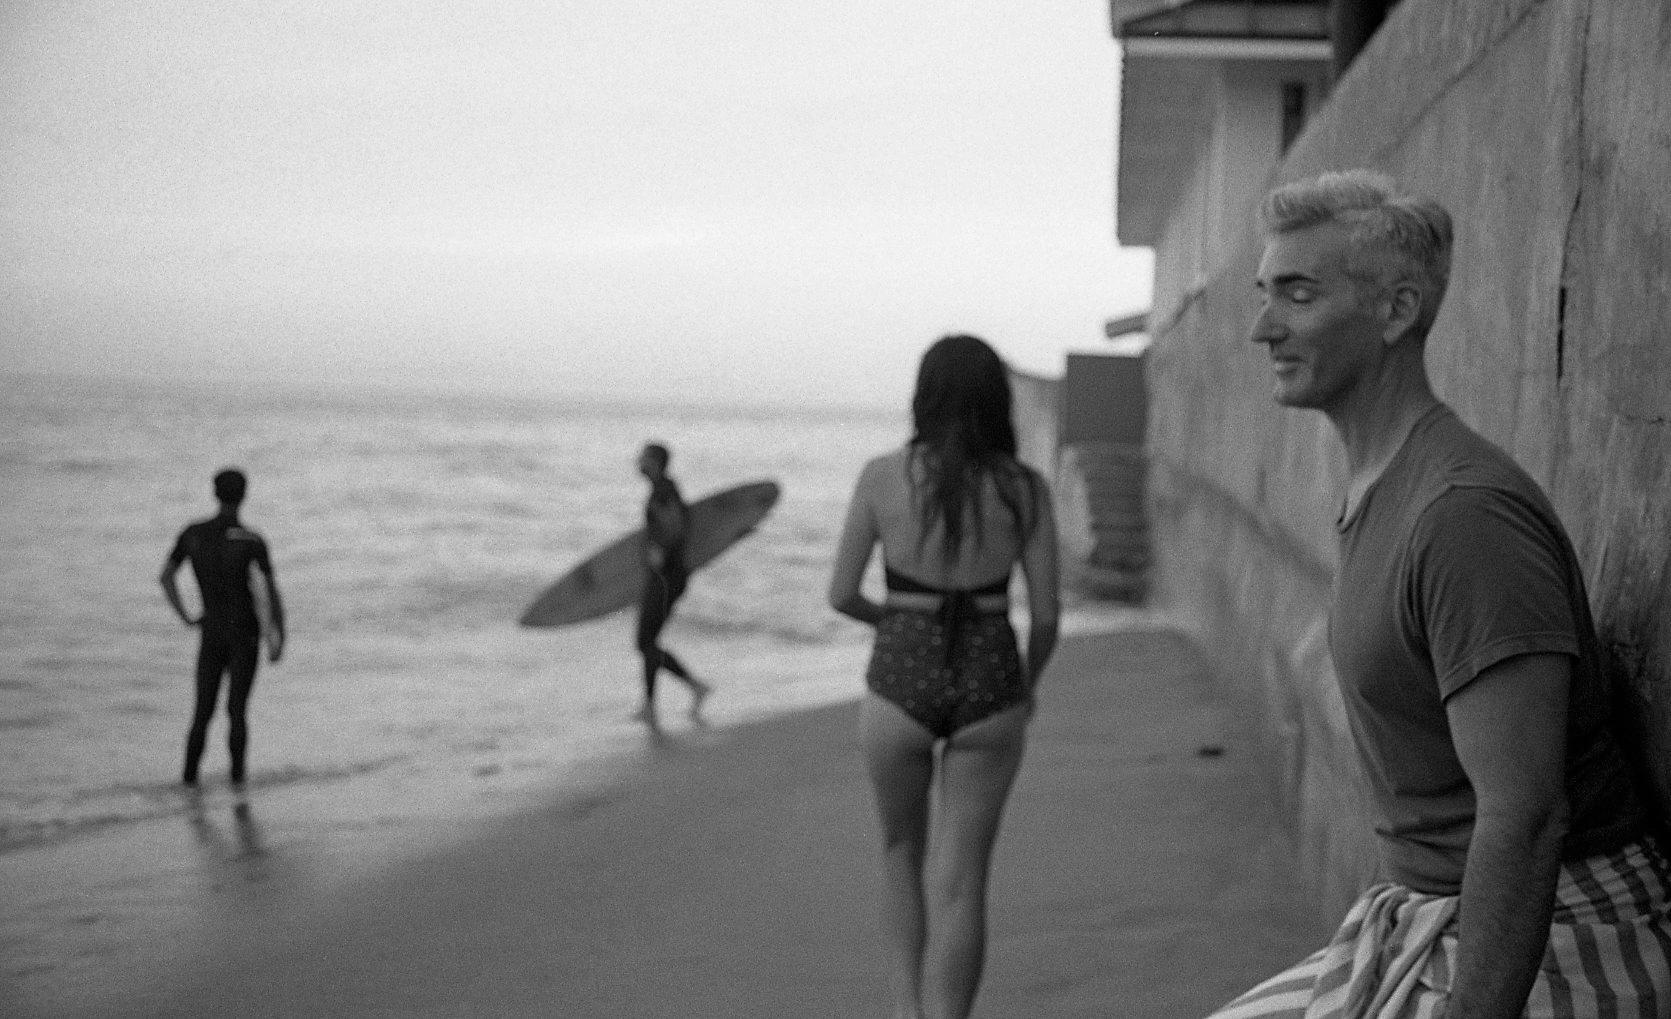 Robin Rice Black and White Photograph – Brian with Eyes Closed with Kim at Sunset, Miramer Beach, Montecito, CA, 2017